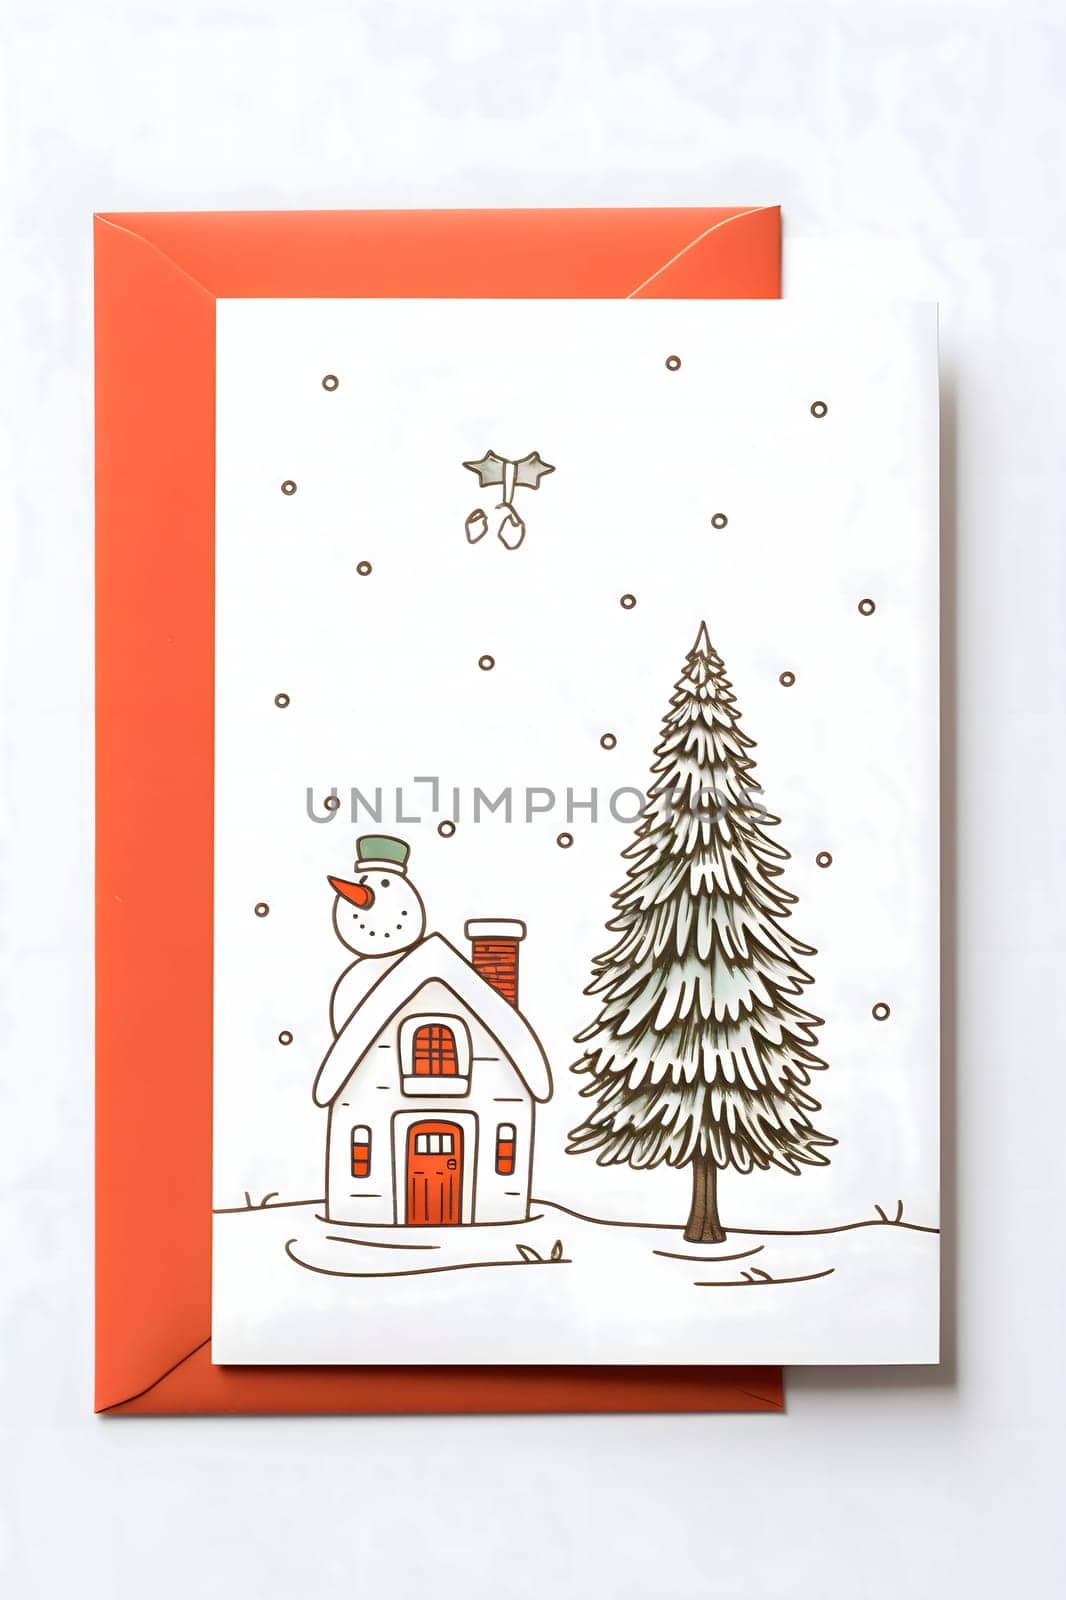 Drawn Christmas tree, snowman and house on a white card. Christmas card as a symbol of remembrance of the birth of the savior. by ThemesS